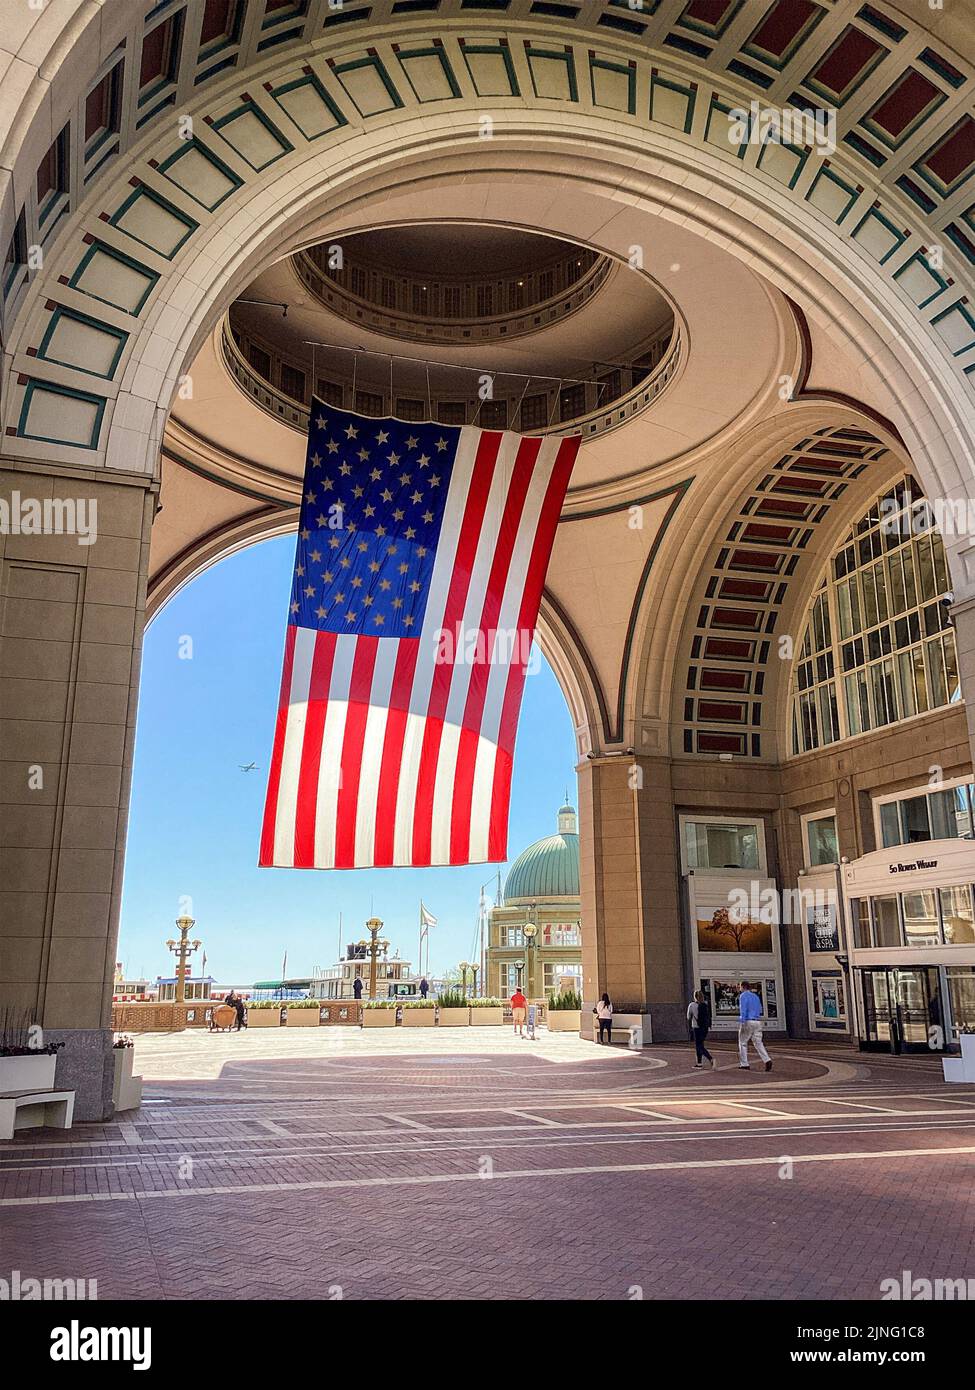 A giant American Flag hangs from the arch and buildings at Rowes Wharf in Boston, Massachusetts Stock Photo